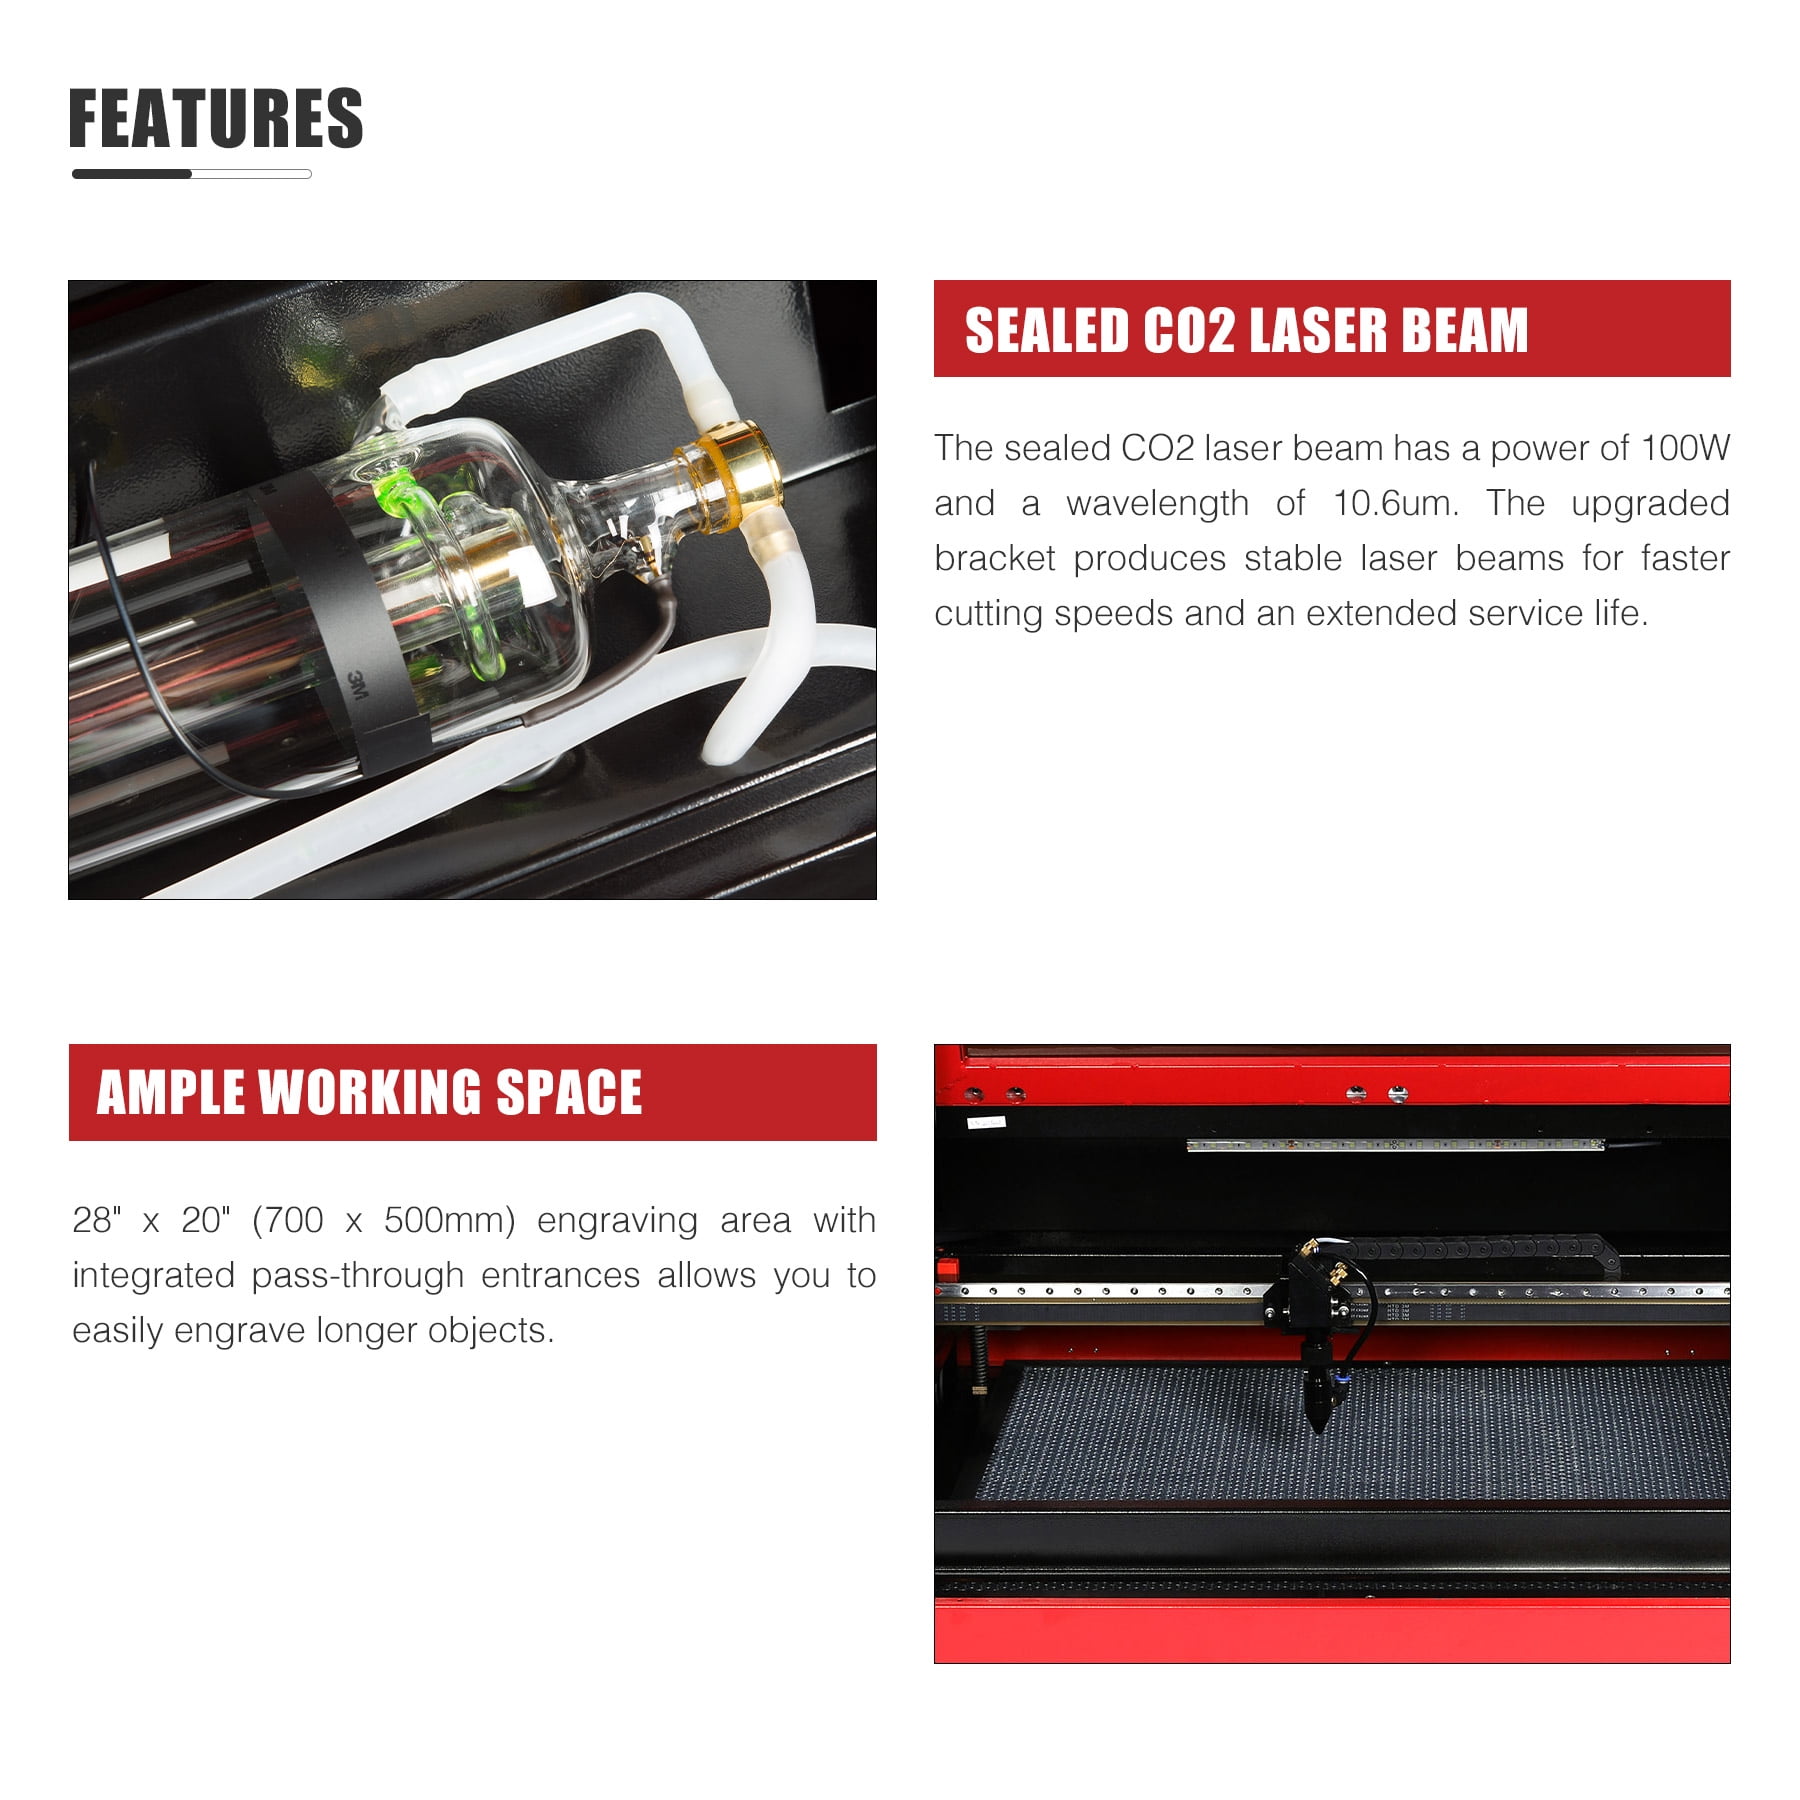 100W CO2 Laser Engraver - Pay as Low as $156/mo. - OMTech – OMTech Laser